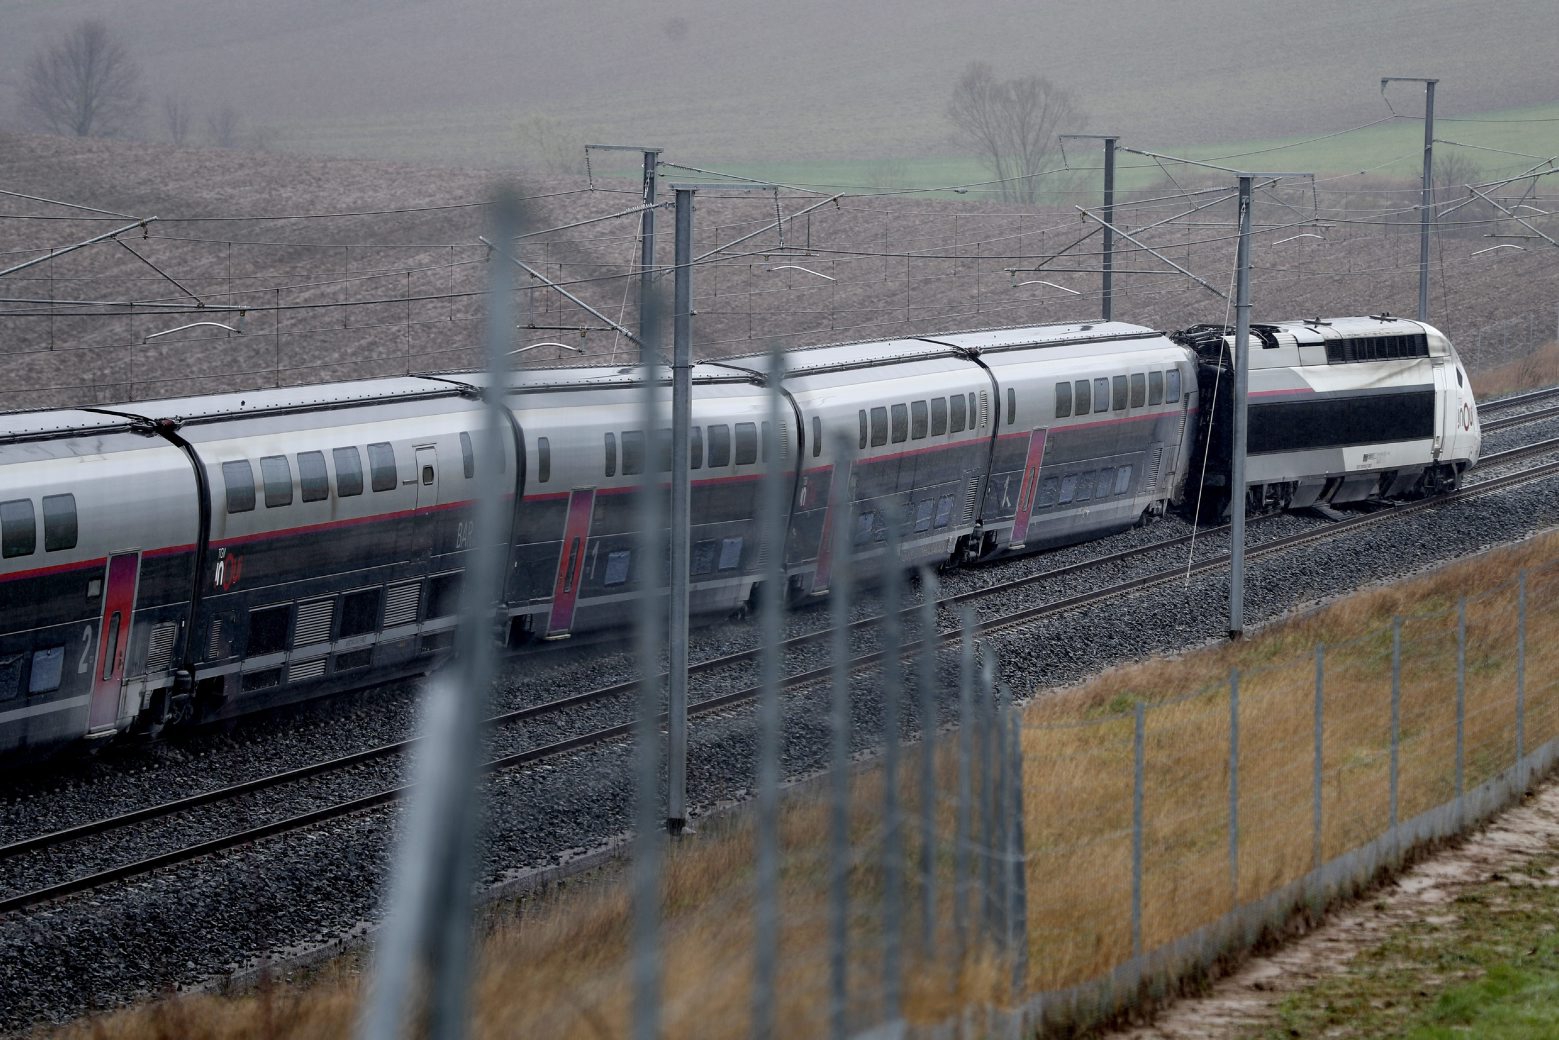 The high-speed TGV train is pictured after it has derailed on a trip to Paris, in Ingenheim, near Strasbourg, eastern France, Thursday, March 5, 2020. The train driver was seriously injured but managed to slam on the emergency brakes and bring the train to a halt. It was the first derailment on a high-speed TGV train in nearly 40 years of commercial service. (AP Photo/Jean-Francois Badias) France Train Derails